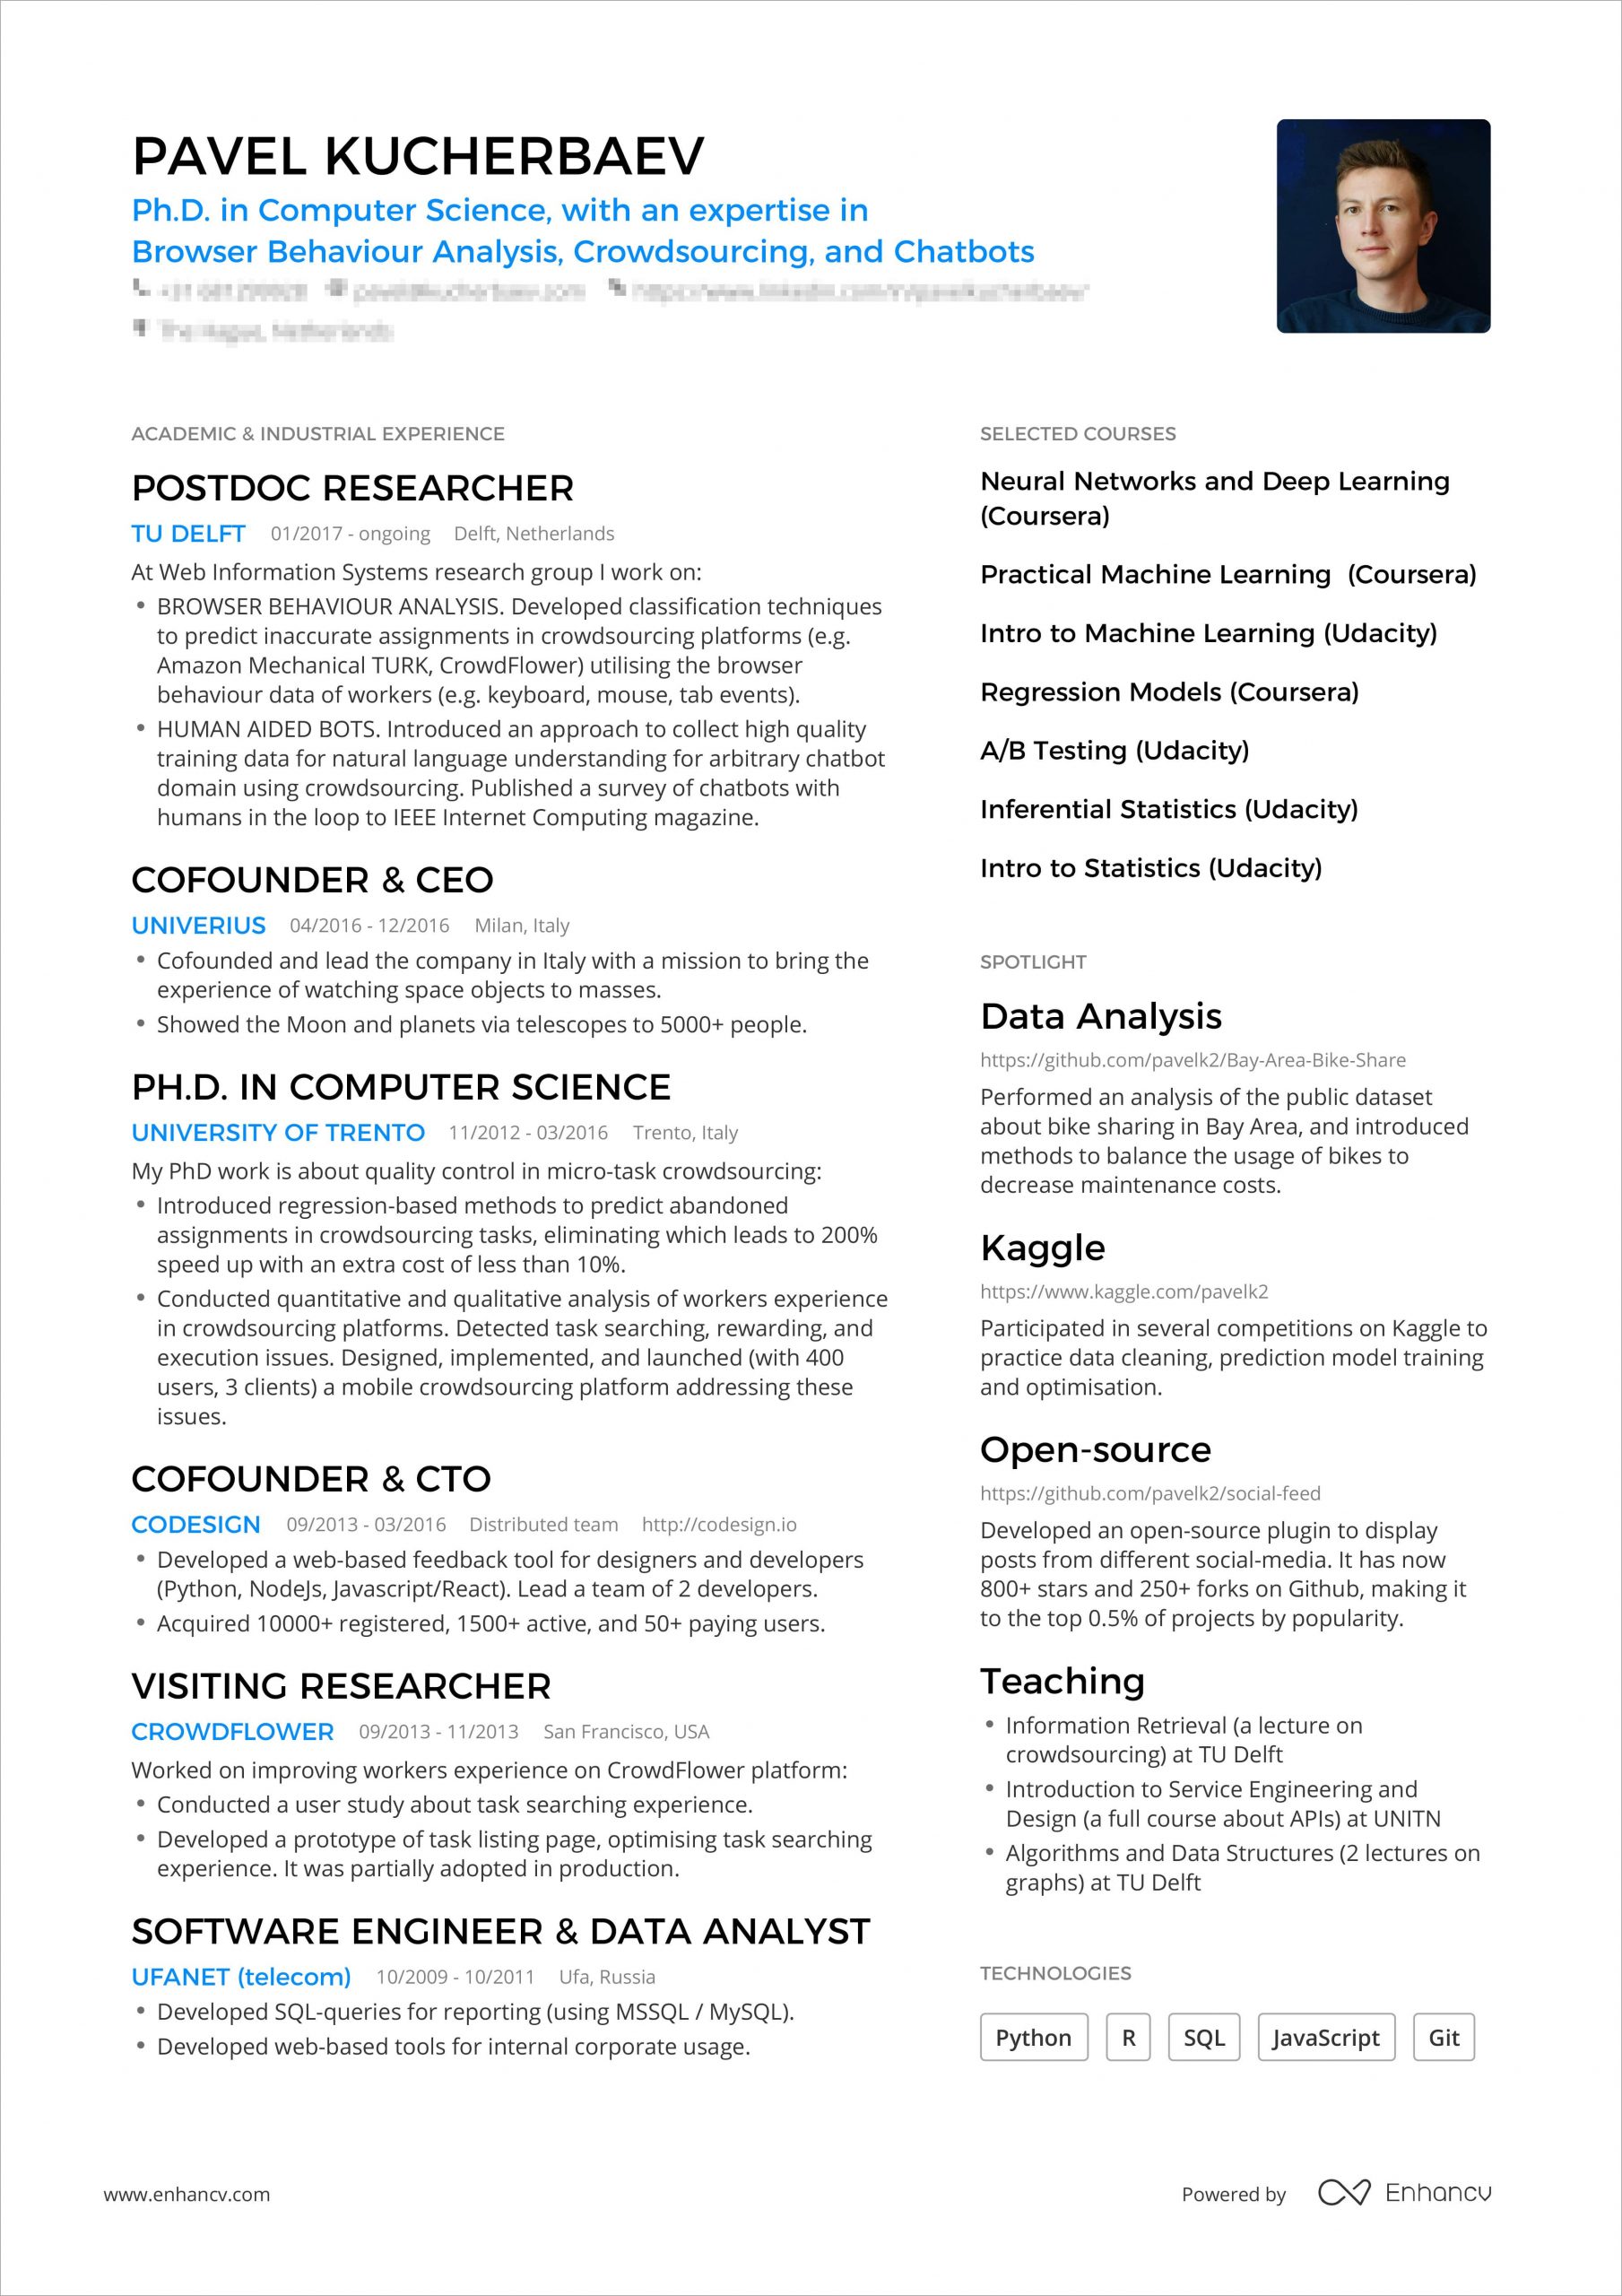 I Need to Look at Sample Resumes One Page Resume: Examples & Guide for 2021